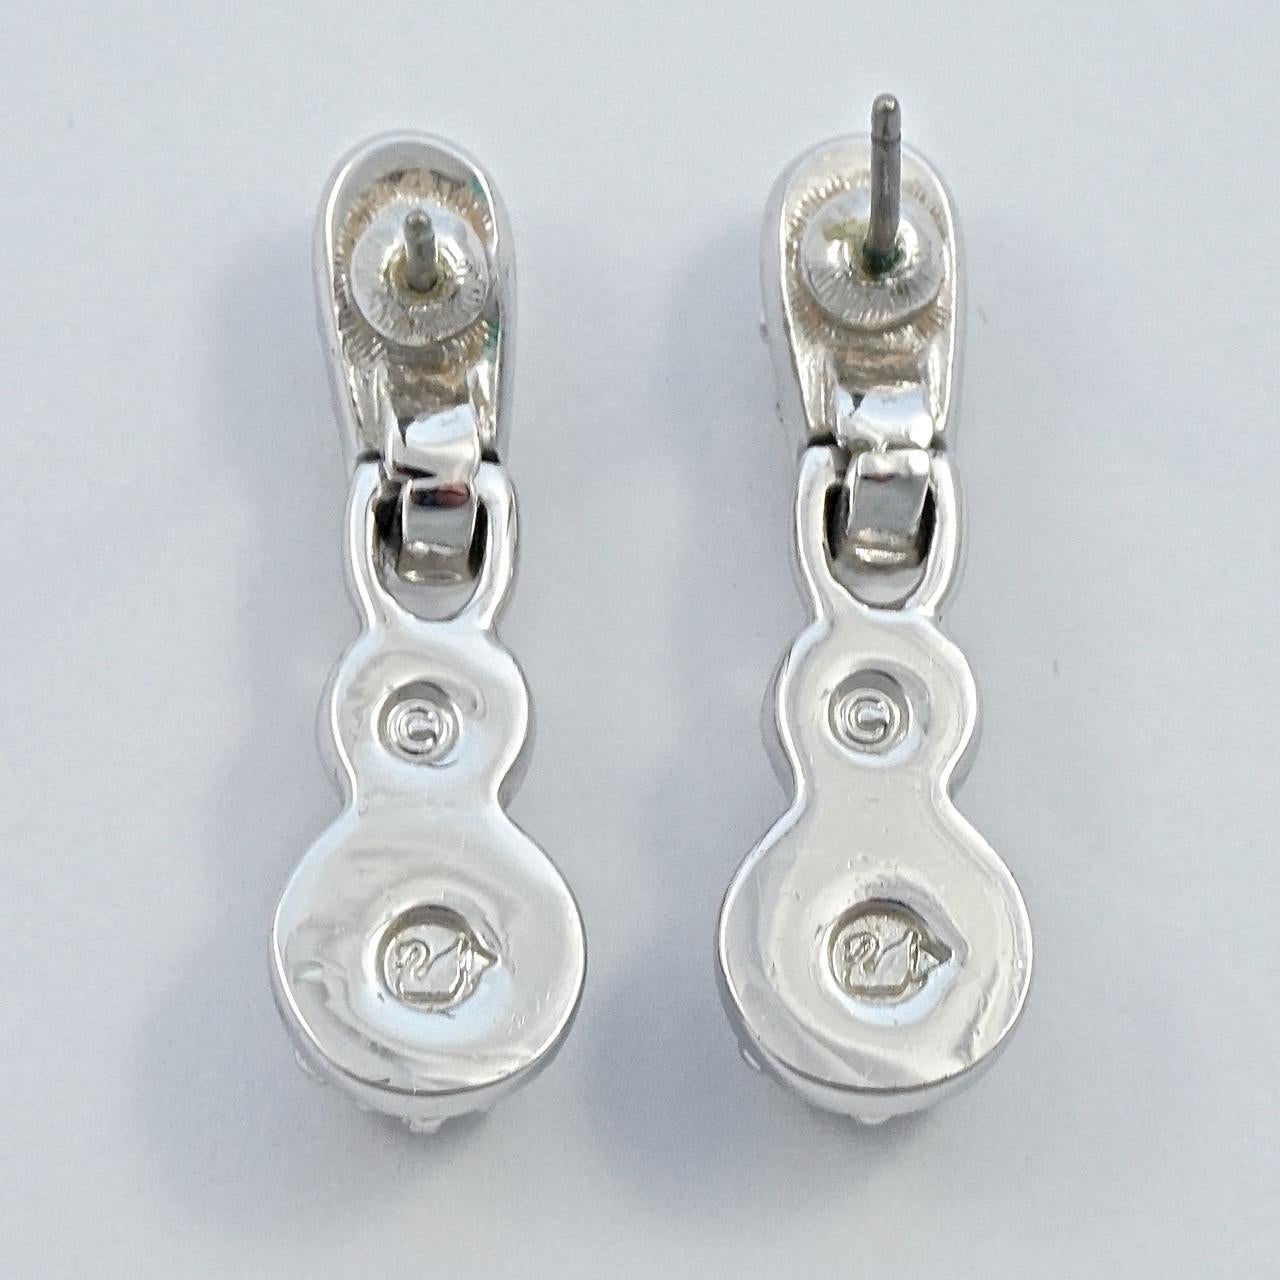 Swarovski lovely silver tone drop earrings set with clear faceted crystals. The earrings are stamped with the Swarovski swan logo. Length 3.3cm / 1.3 inches. The earrings are in very good condition, and will arrive in their original box.

These